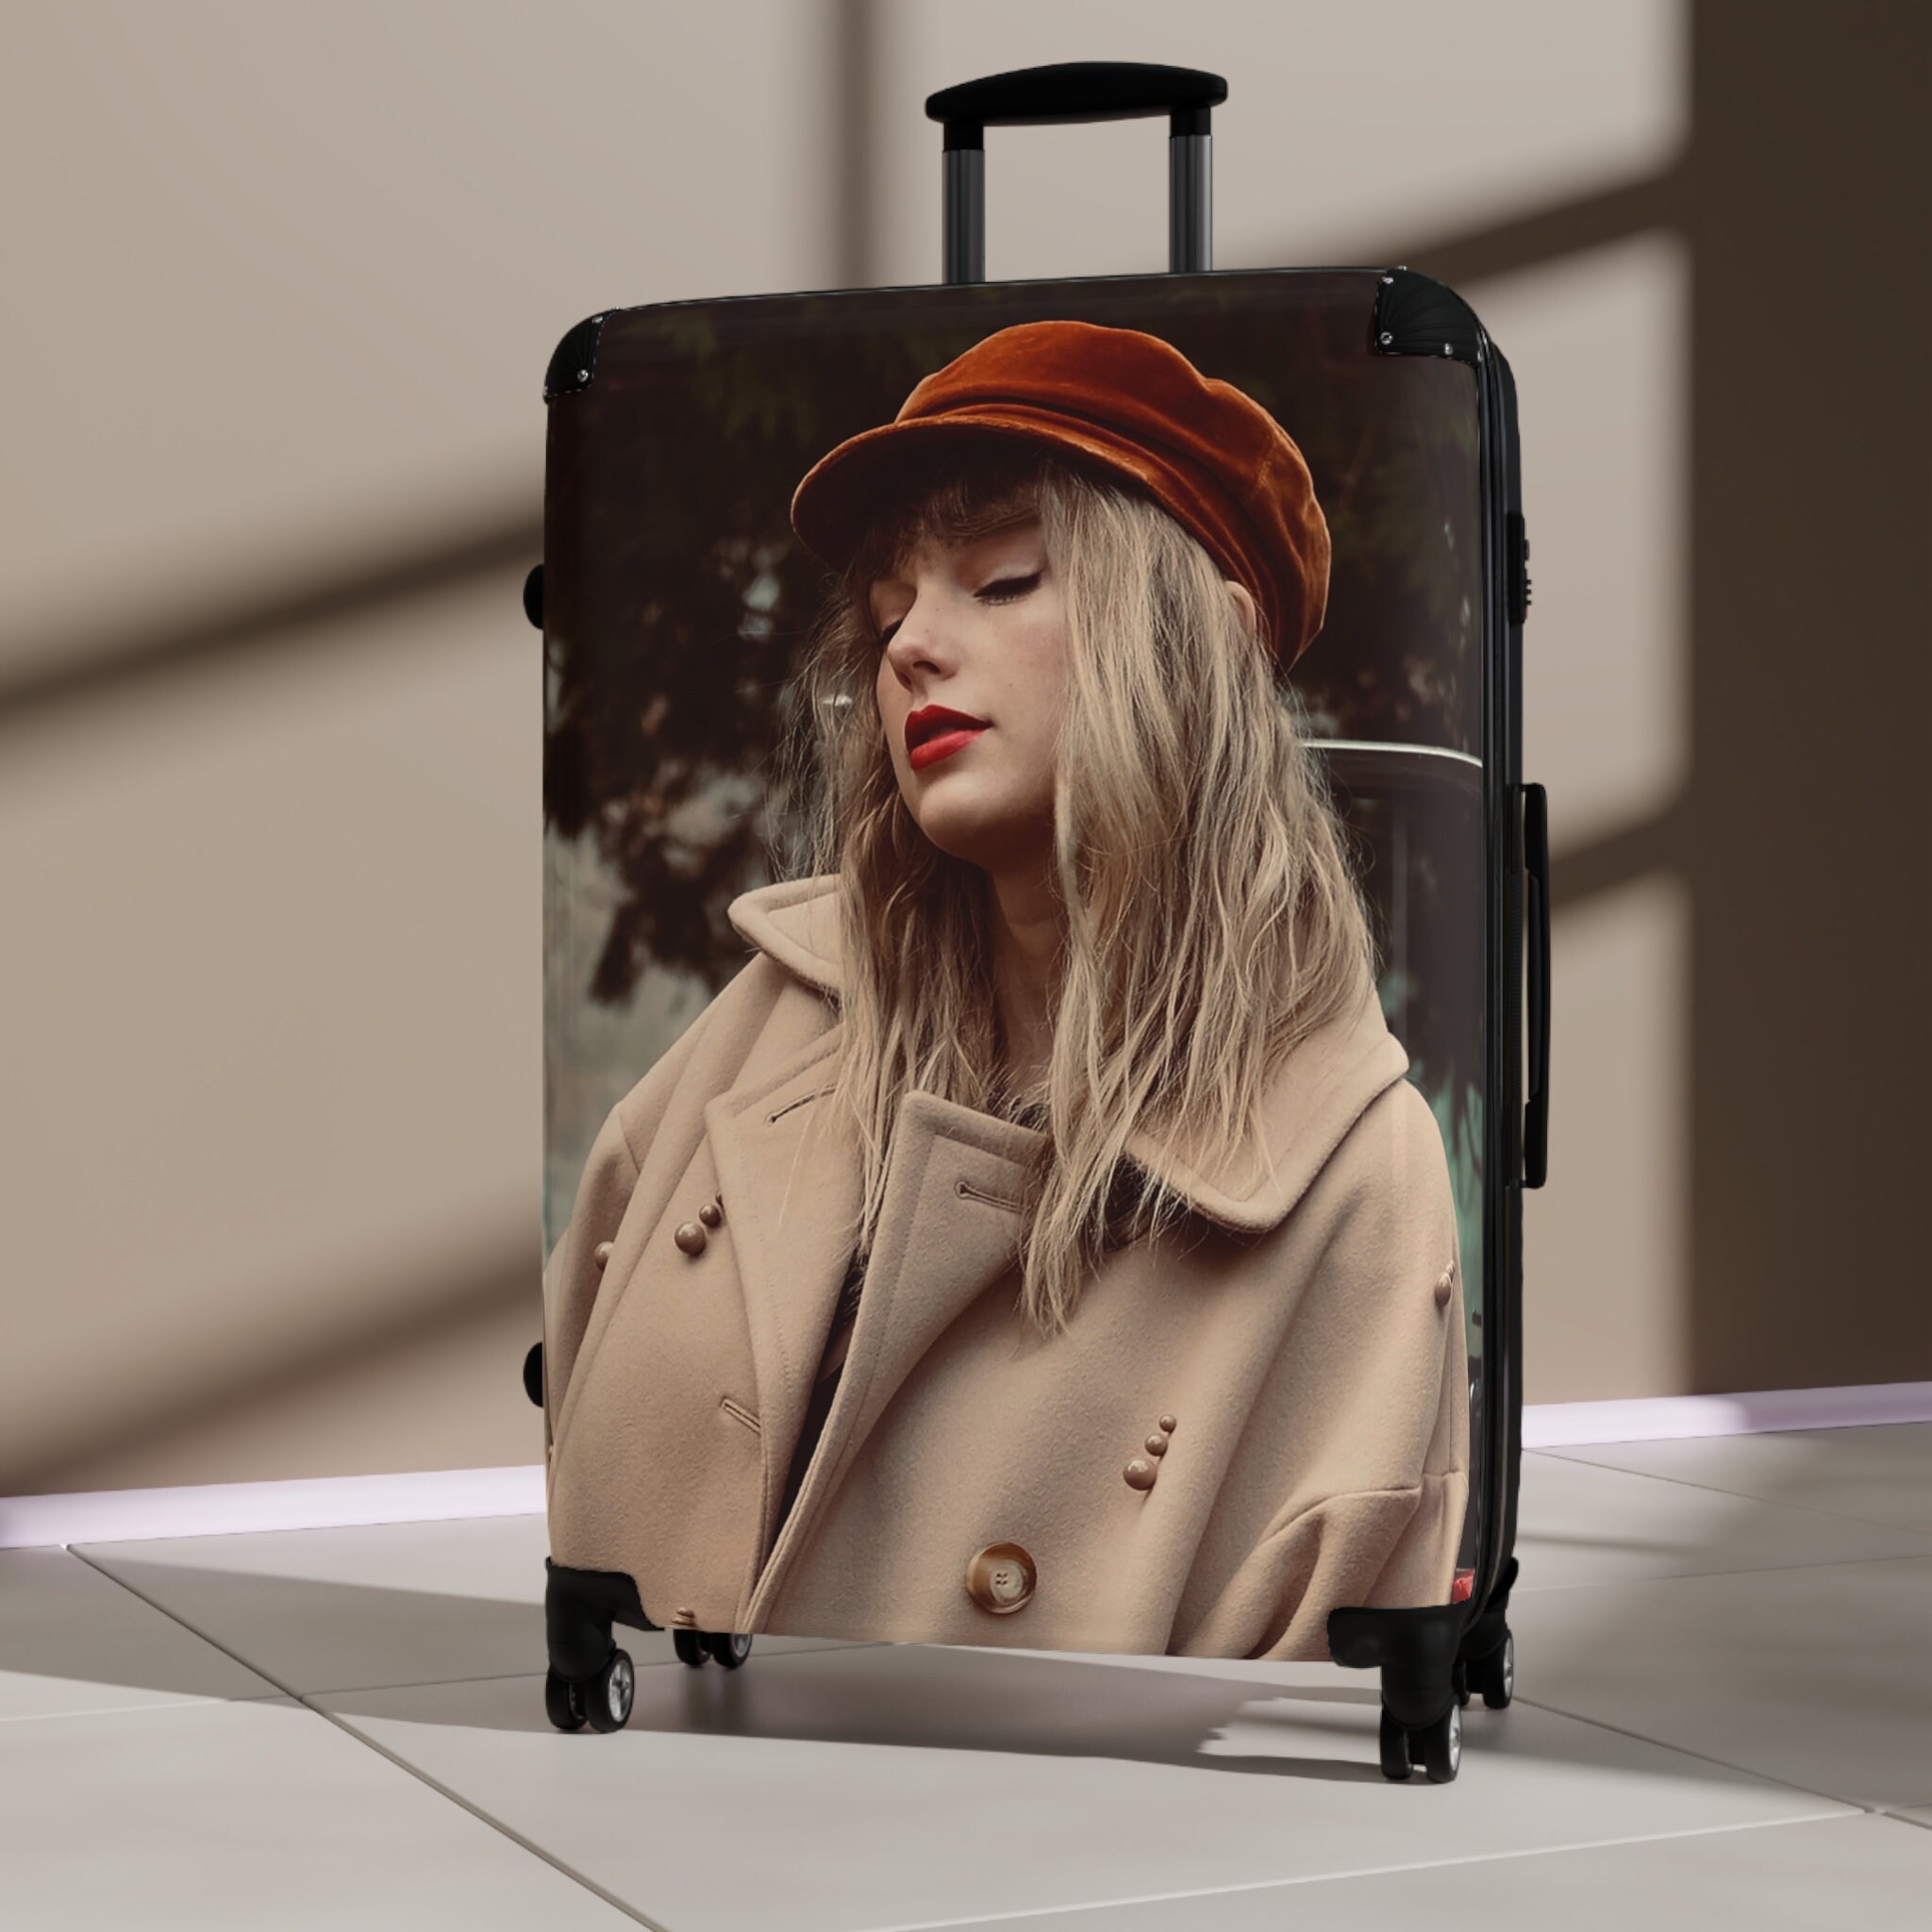 Taylor Graphic Suitcase - Taylor merch